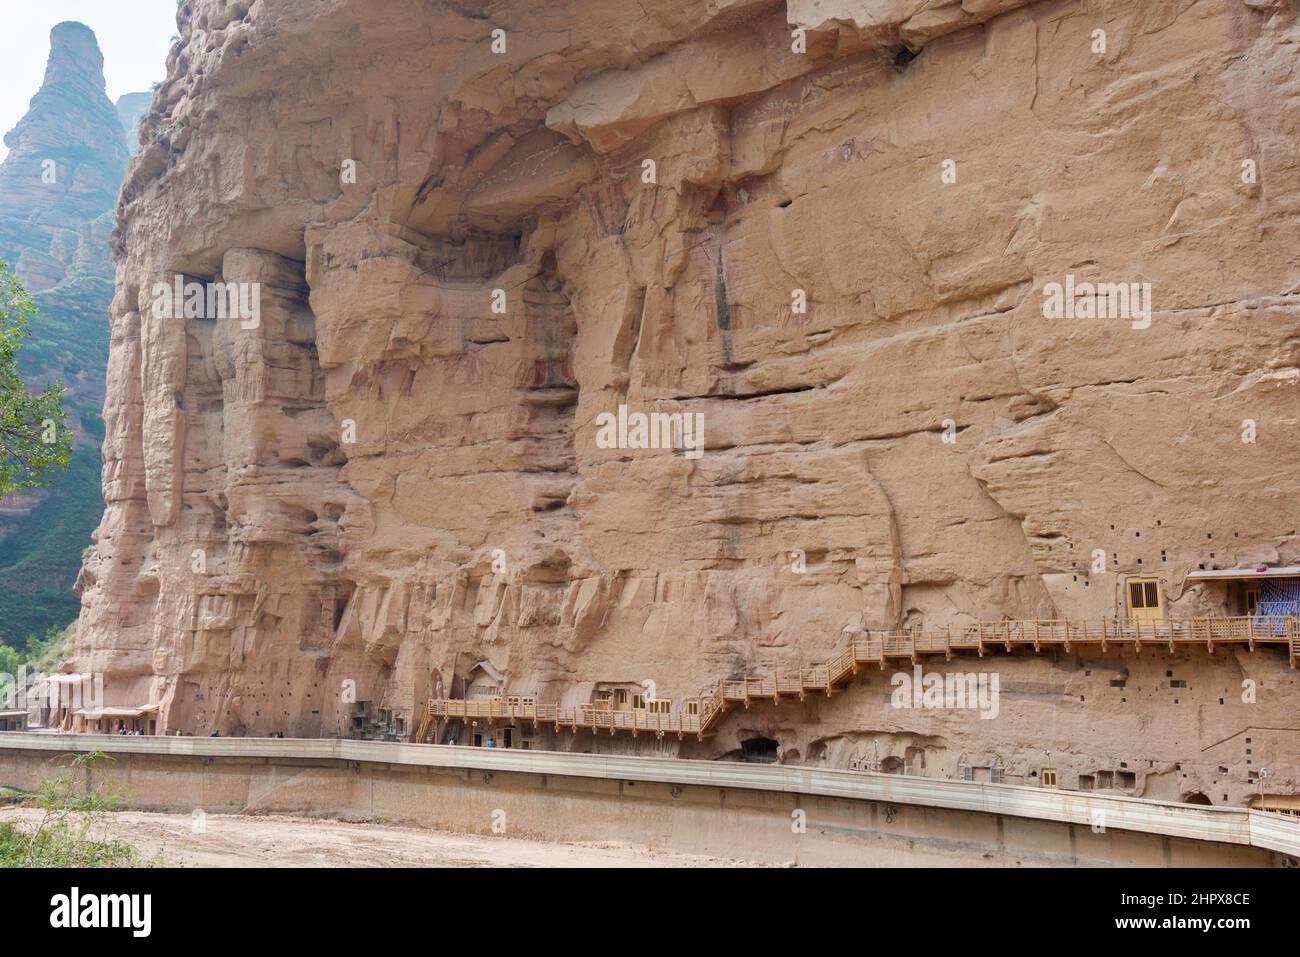 LANZHOU, CHINA - Bingling Cave Temple(UNESCO World heritage site). a famous Temple in Lanzhou, Gansu, China. Stock Photo